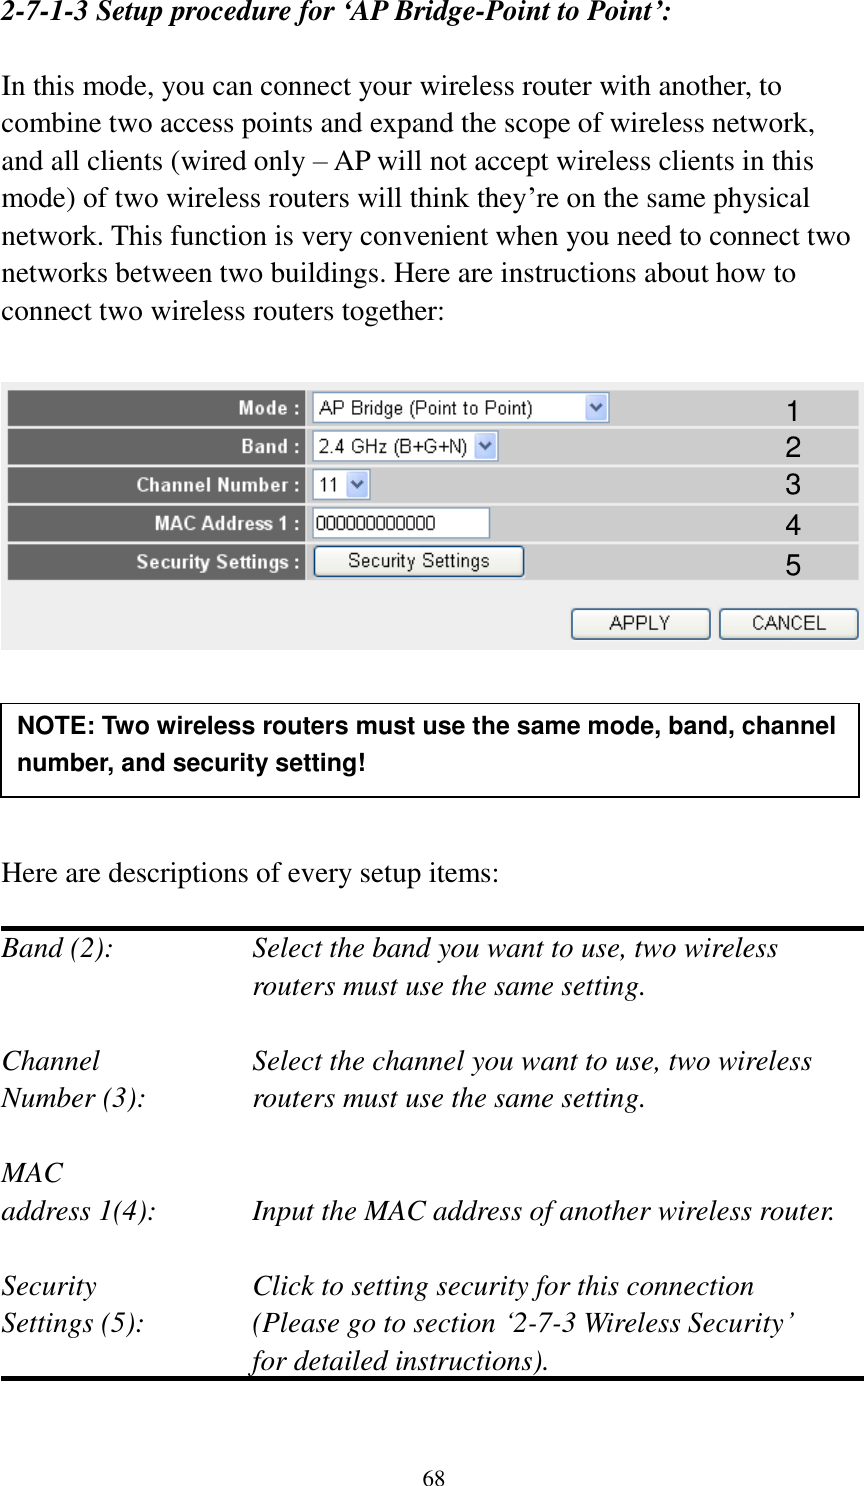 68 2-7-1-3 Setup procedure for ‘AP Bridge-Point to Point’:  In this mode, you can connect your wireless router with another, to combine two access points and expand the scope of wireless network, and all clients (wired only – AP will not accept wireless clients in this mode) of two wireless routers will think they‟re on the same physical network. This function is very convenient when you need to connect two networks between two buildings. Here are instructions about how to connect two wireless routers together:        Here are descriptions of every setup items:  Band (2):  Select the band you want to use, two wireless routers must use the same setting.  Channel  Select the channel you want to use, two wireless Number (3):  routers must use the same setting.  MAC address 1(4):  Input the MAC address of another wireless router.  Security    Click to setting security for this connection Settings (5):  (Please go to section „2-7-3 Wireless Security‟   for detailed instructions).  NOTE: Two wireless routers must use the same mode, band, channel number, and security setting!  1 2 3 4 5 